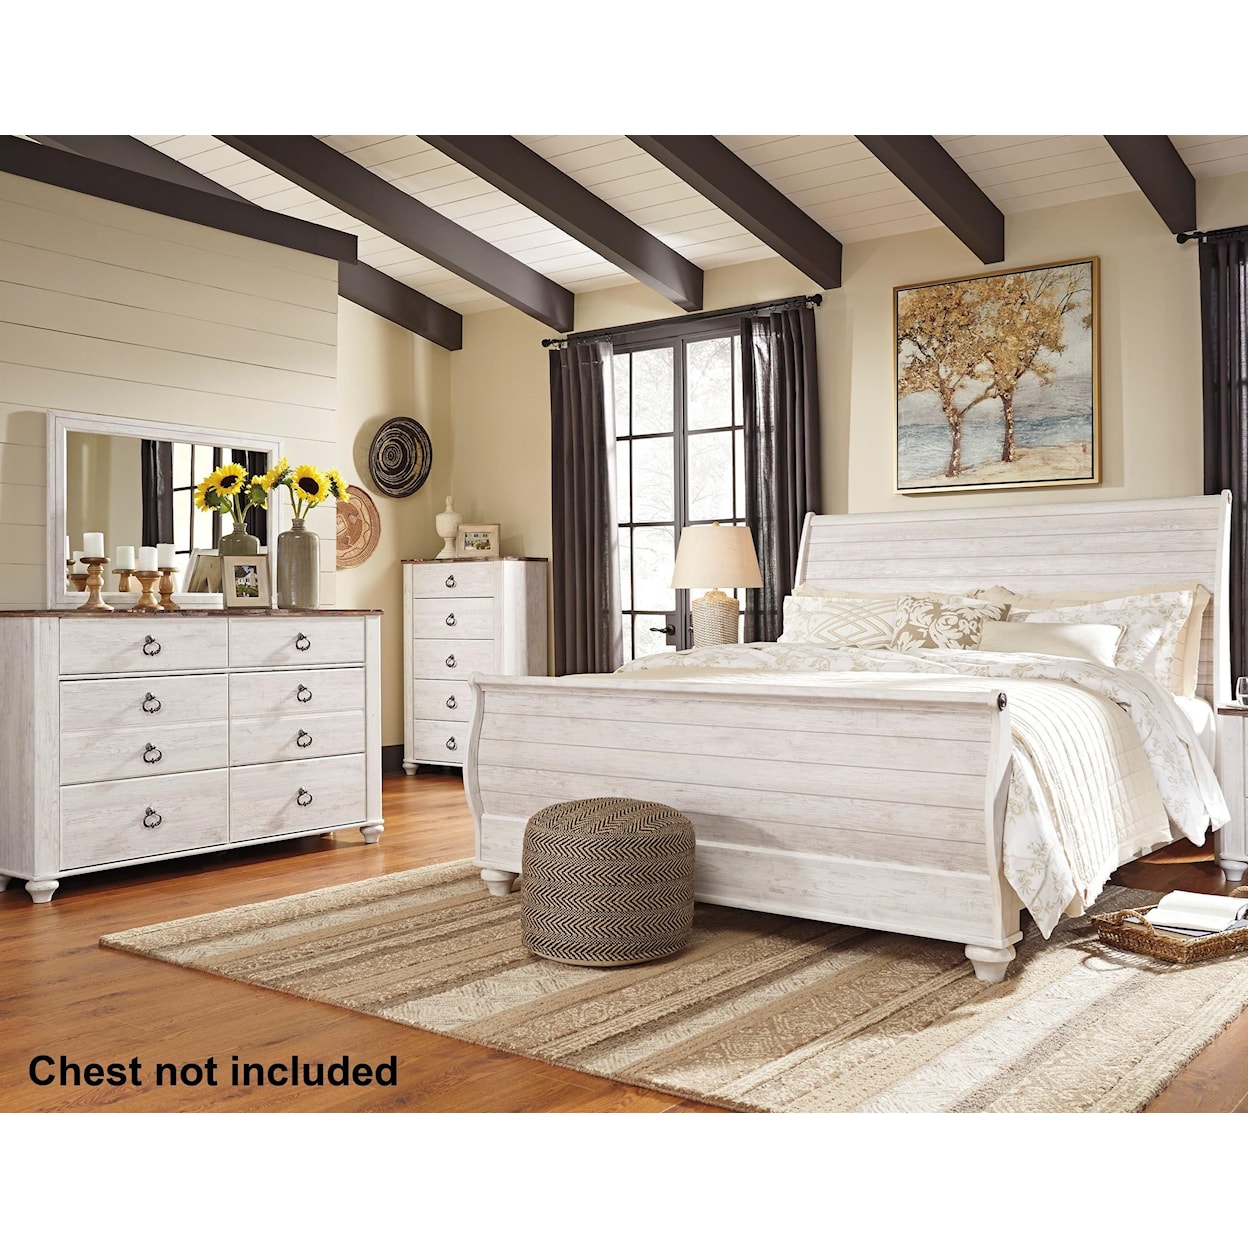 Signature Design by Ashley Willowton King Bedroom Group